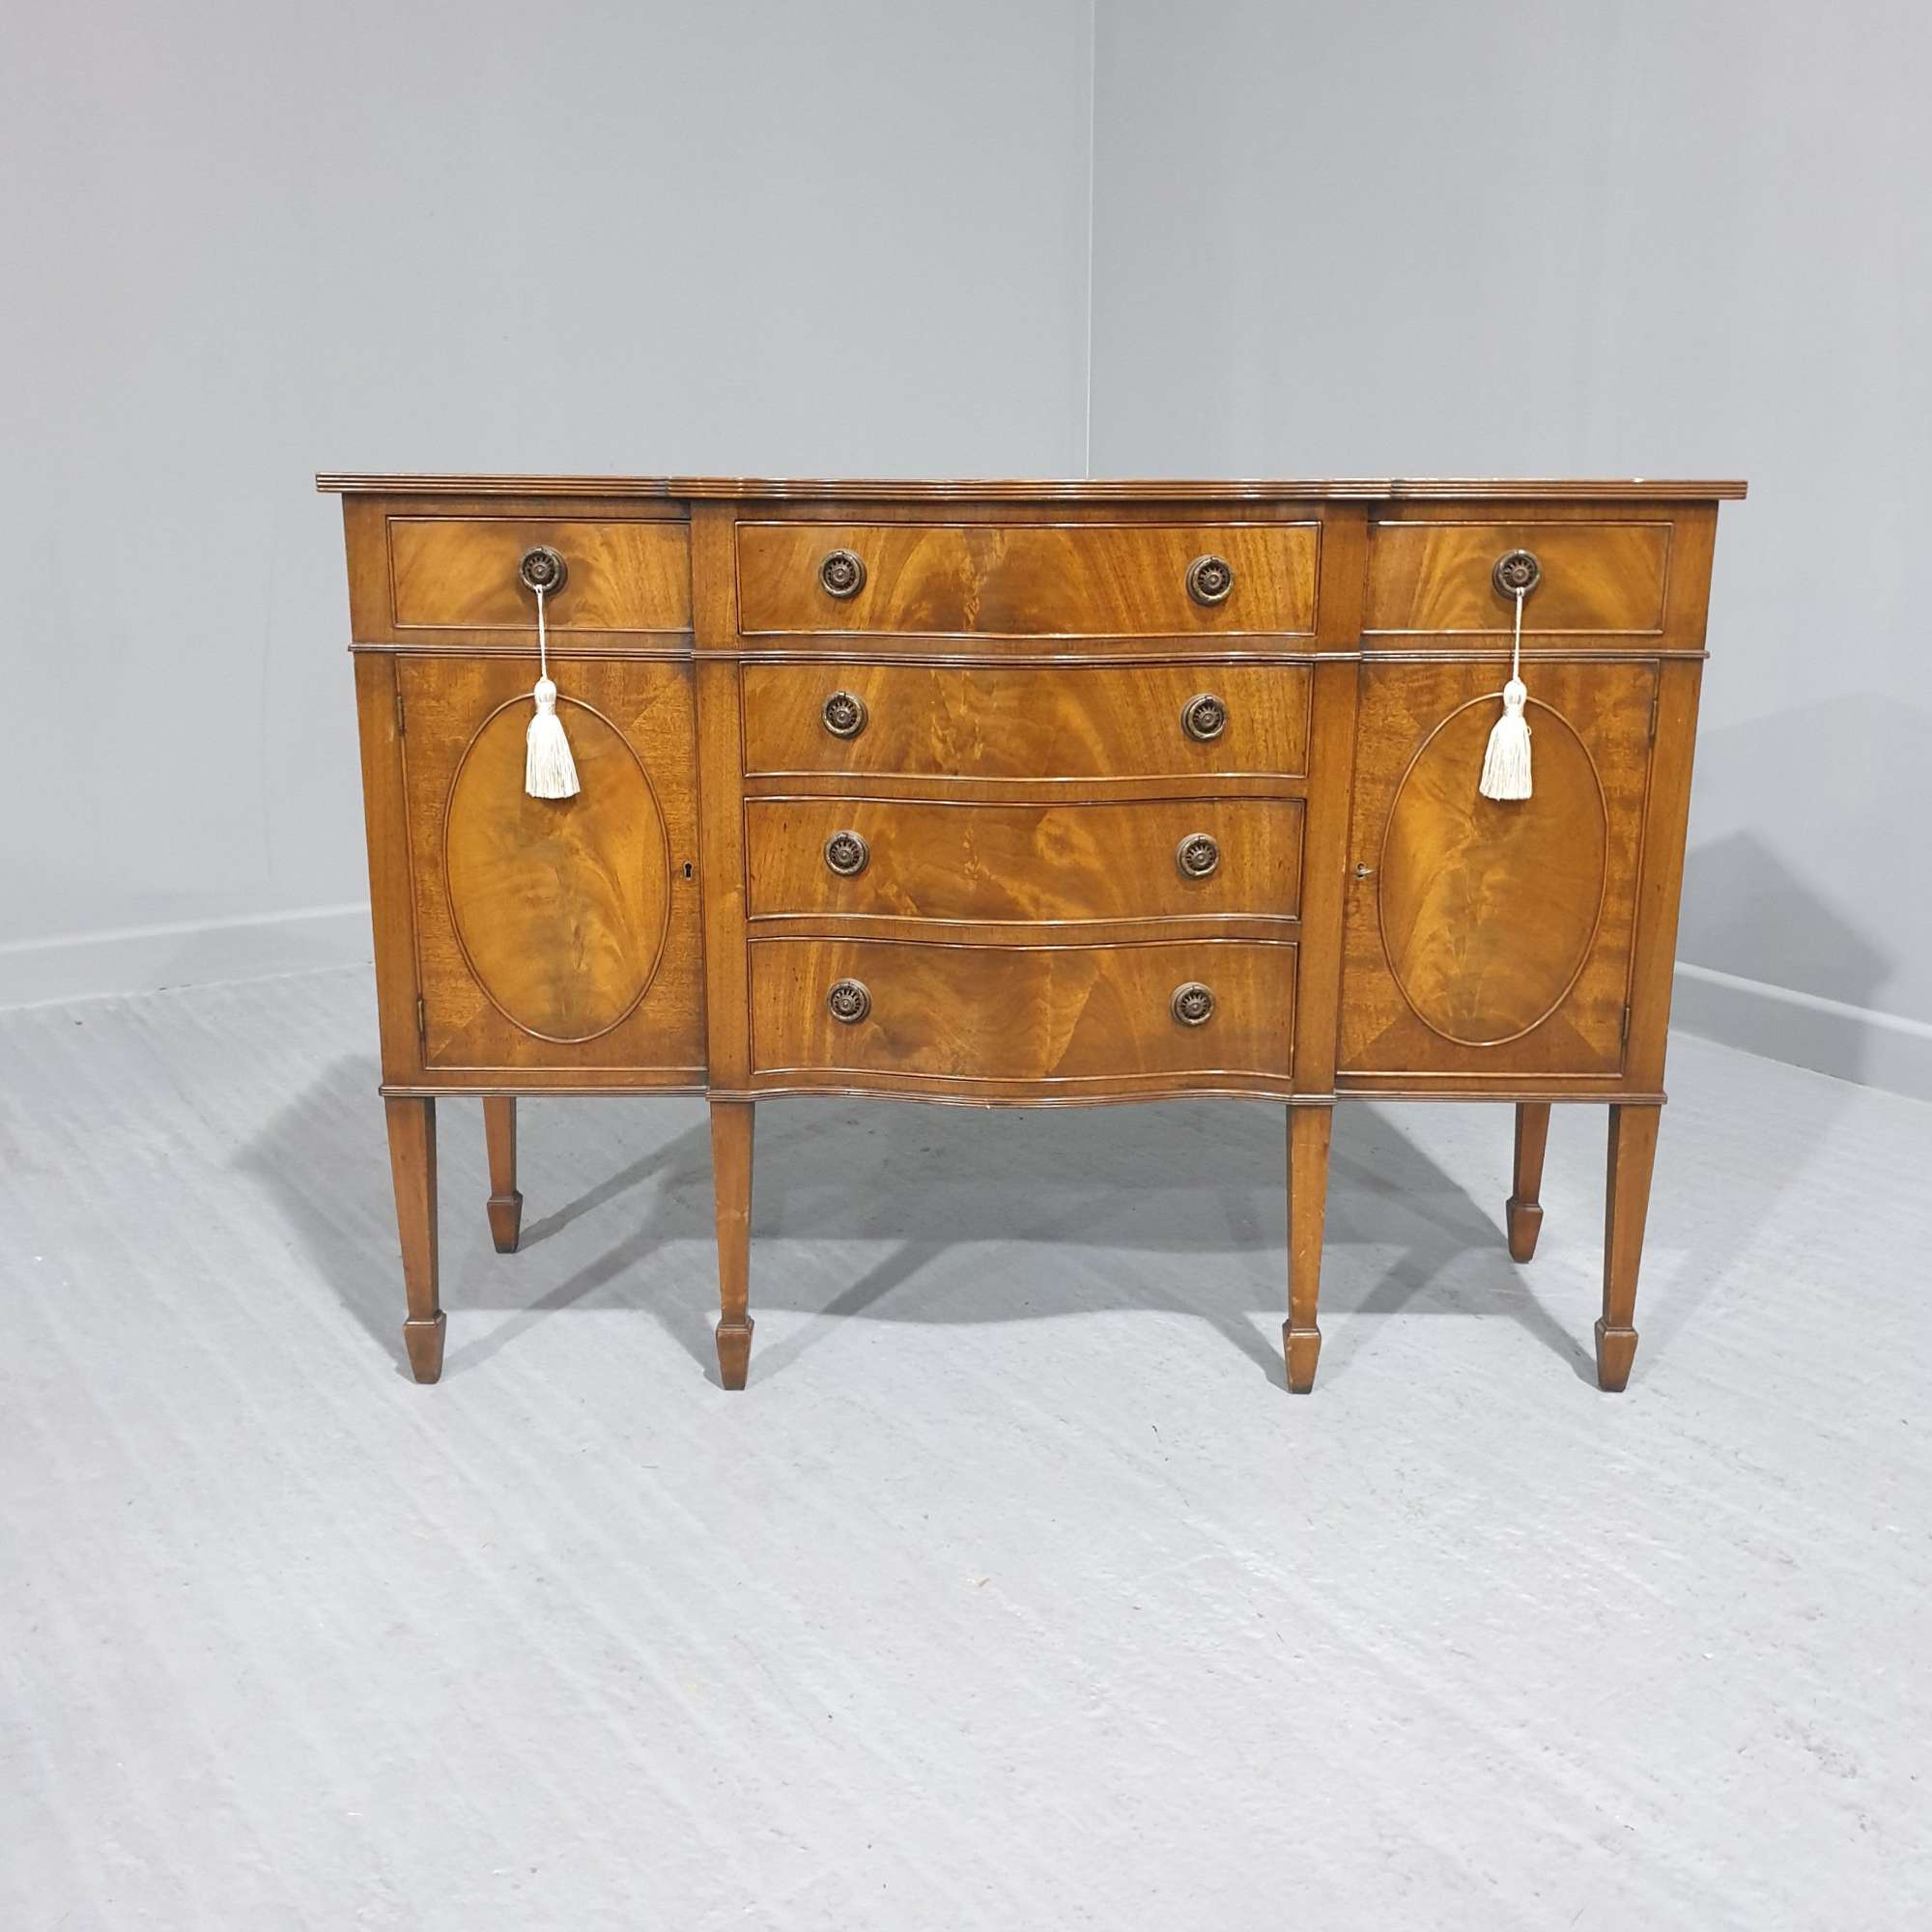 Very Nice Mahogany Sideboard Of Small Proportions